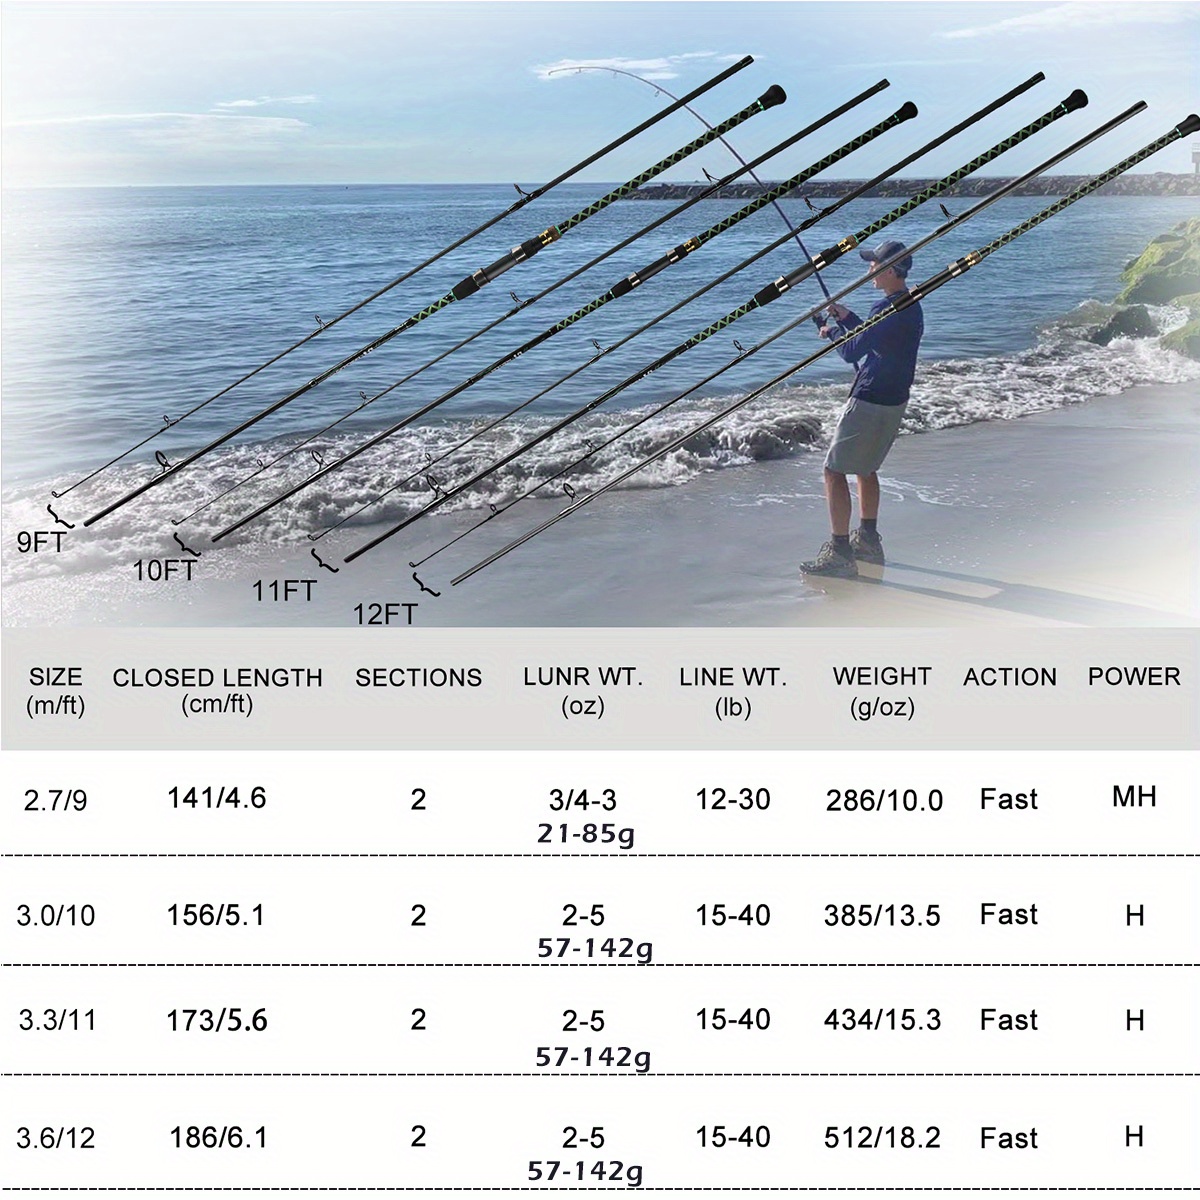 Sougayilang Surf Spinning Fishing Rod Carbon Travel for Beach Saltwater 2  Pieces (9'/10'/11'/12') Surf Rod